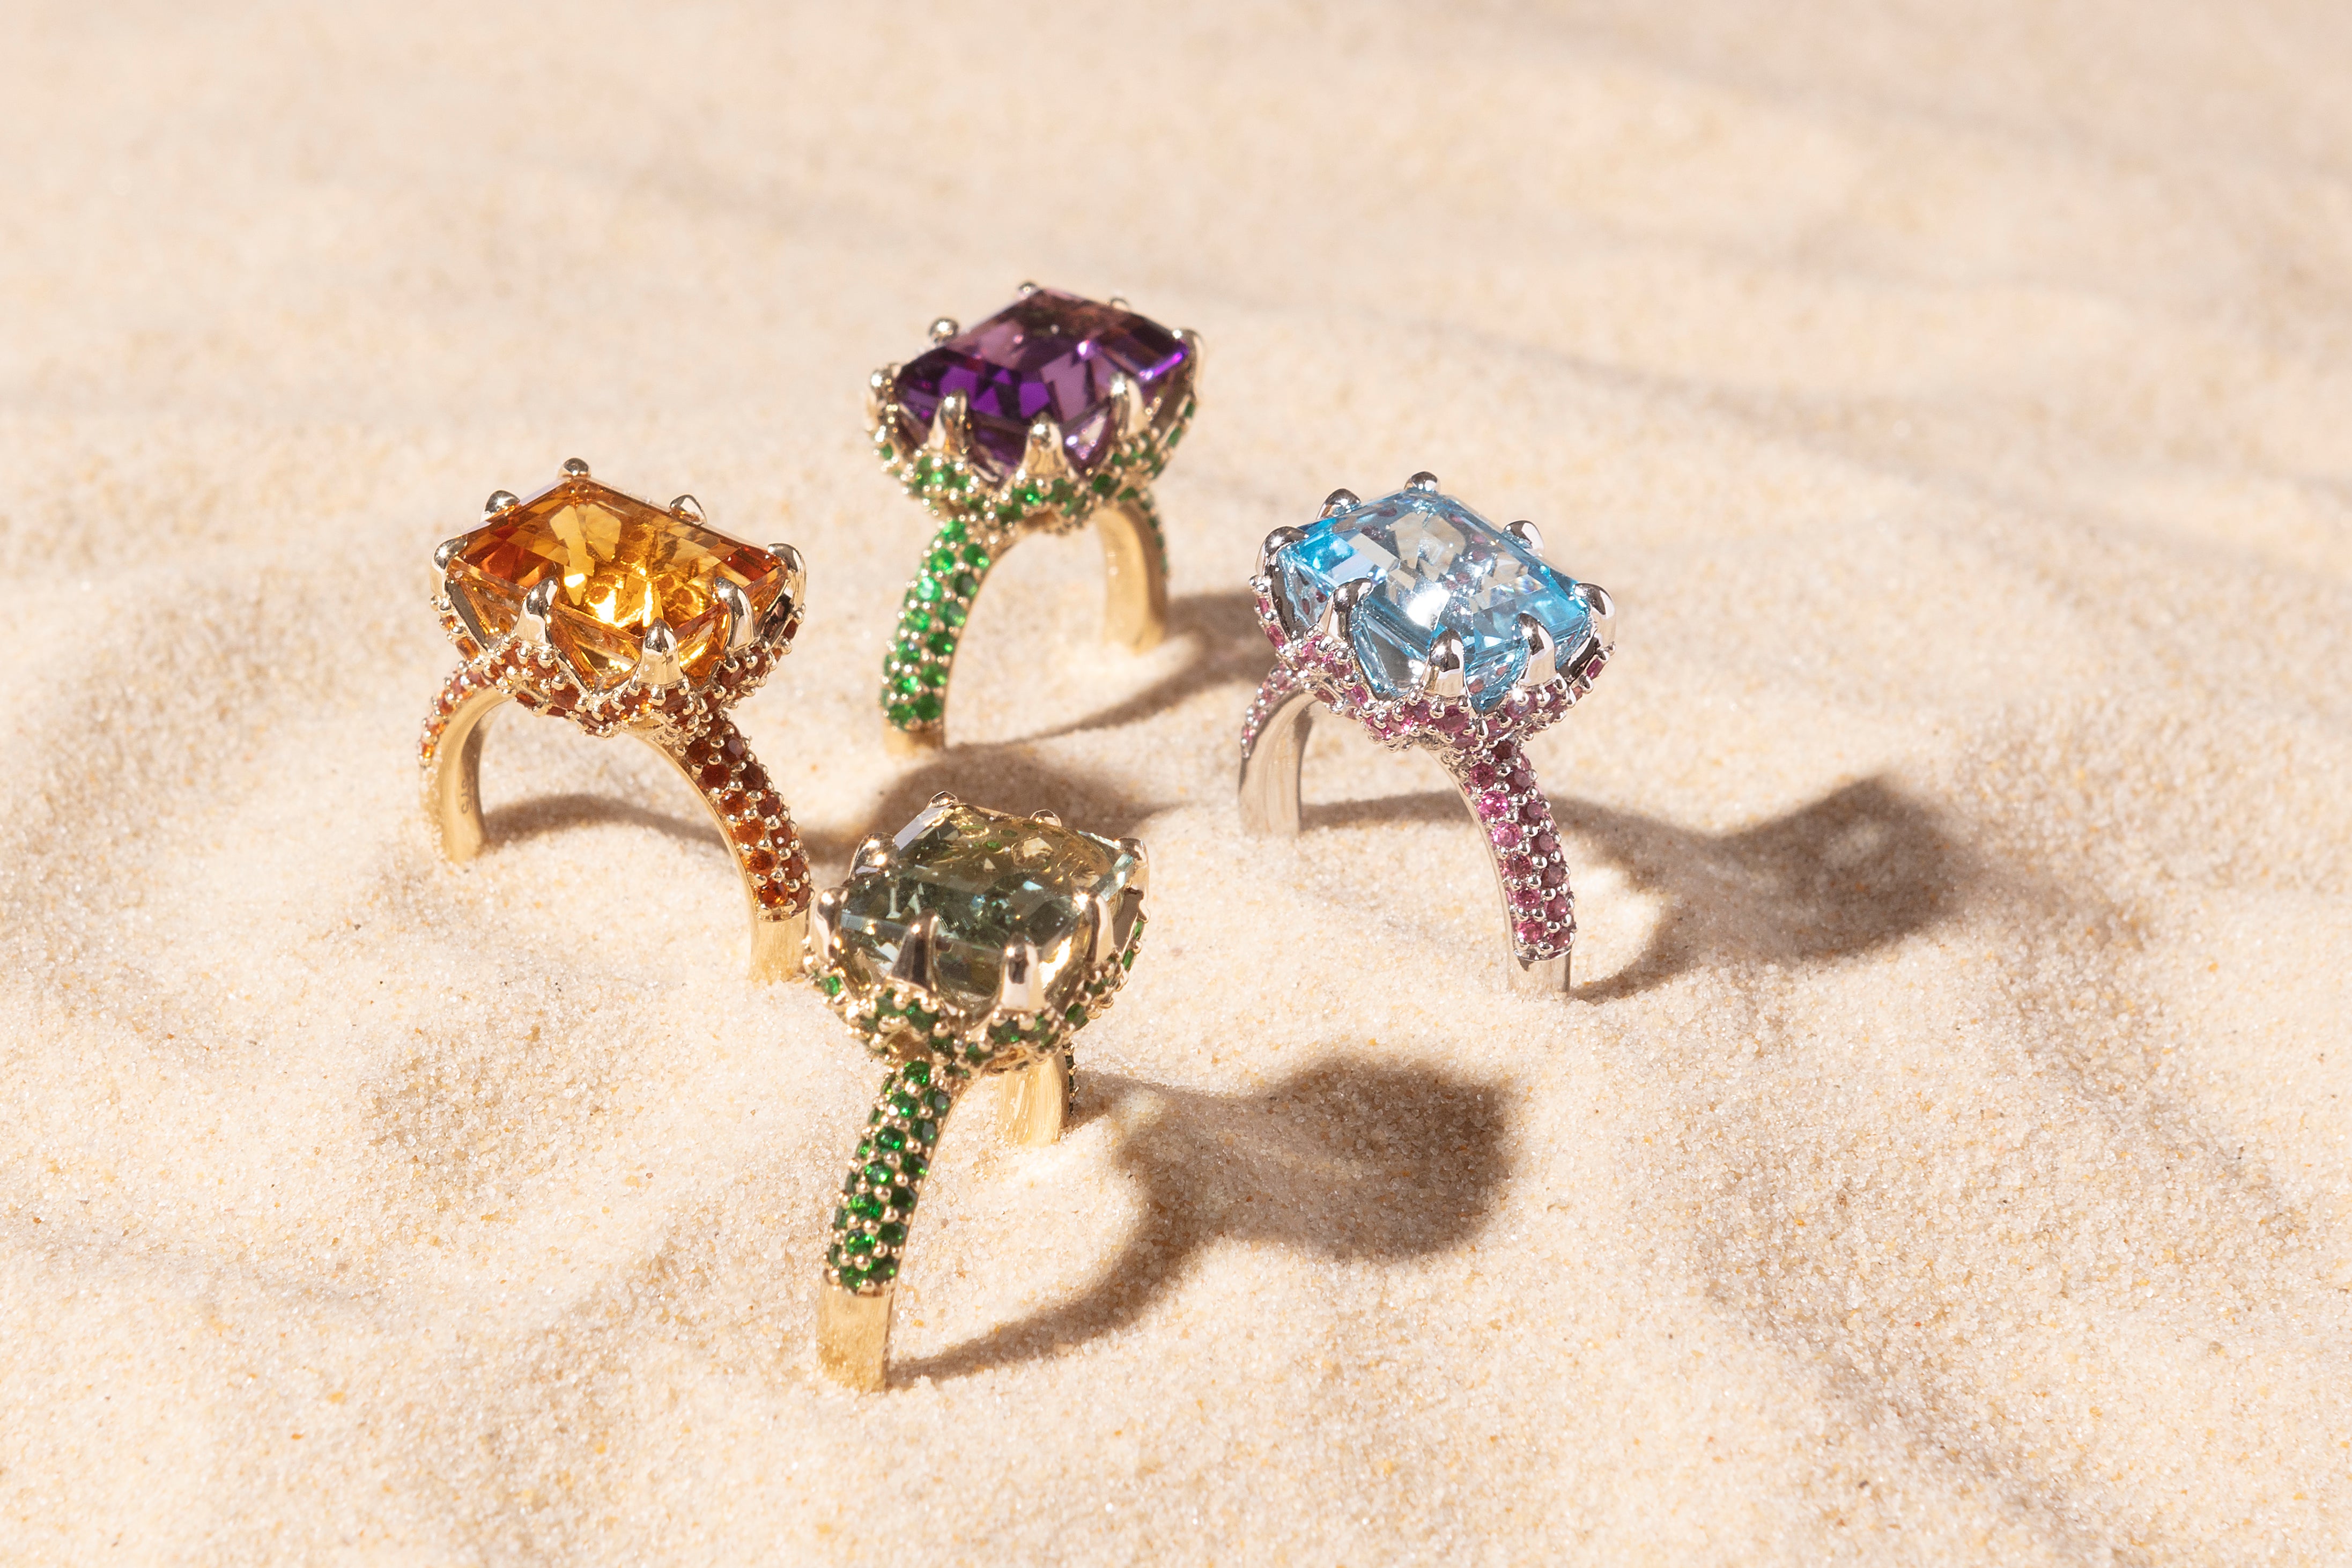 Find your personal treasure in our new, colourful summer pieces